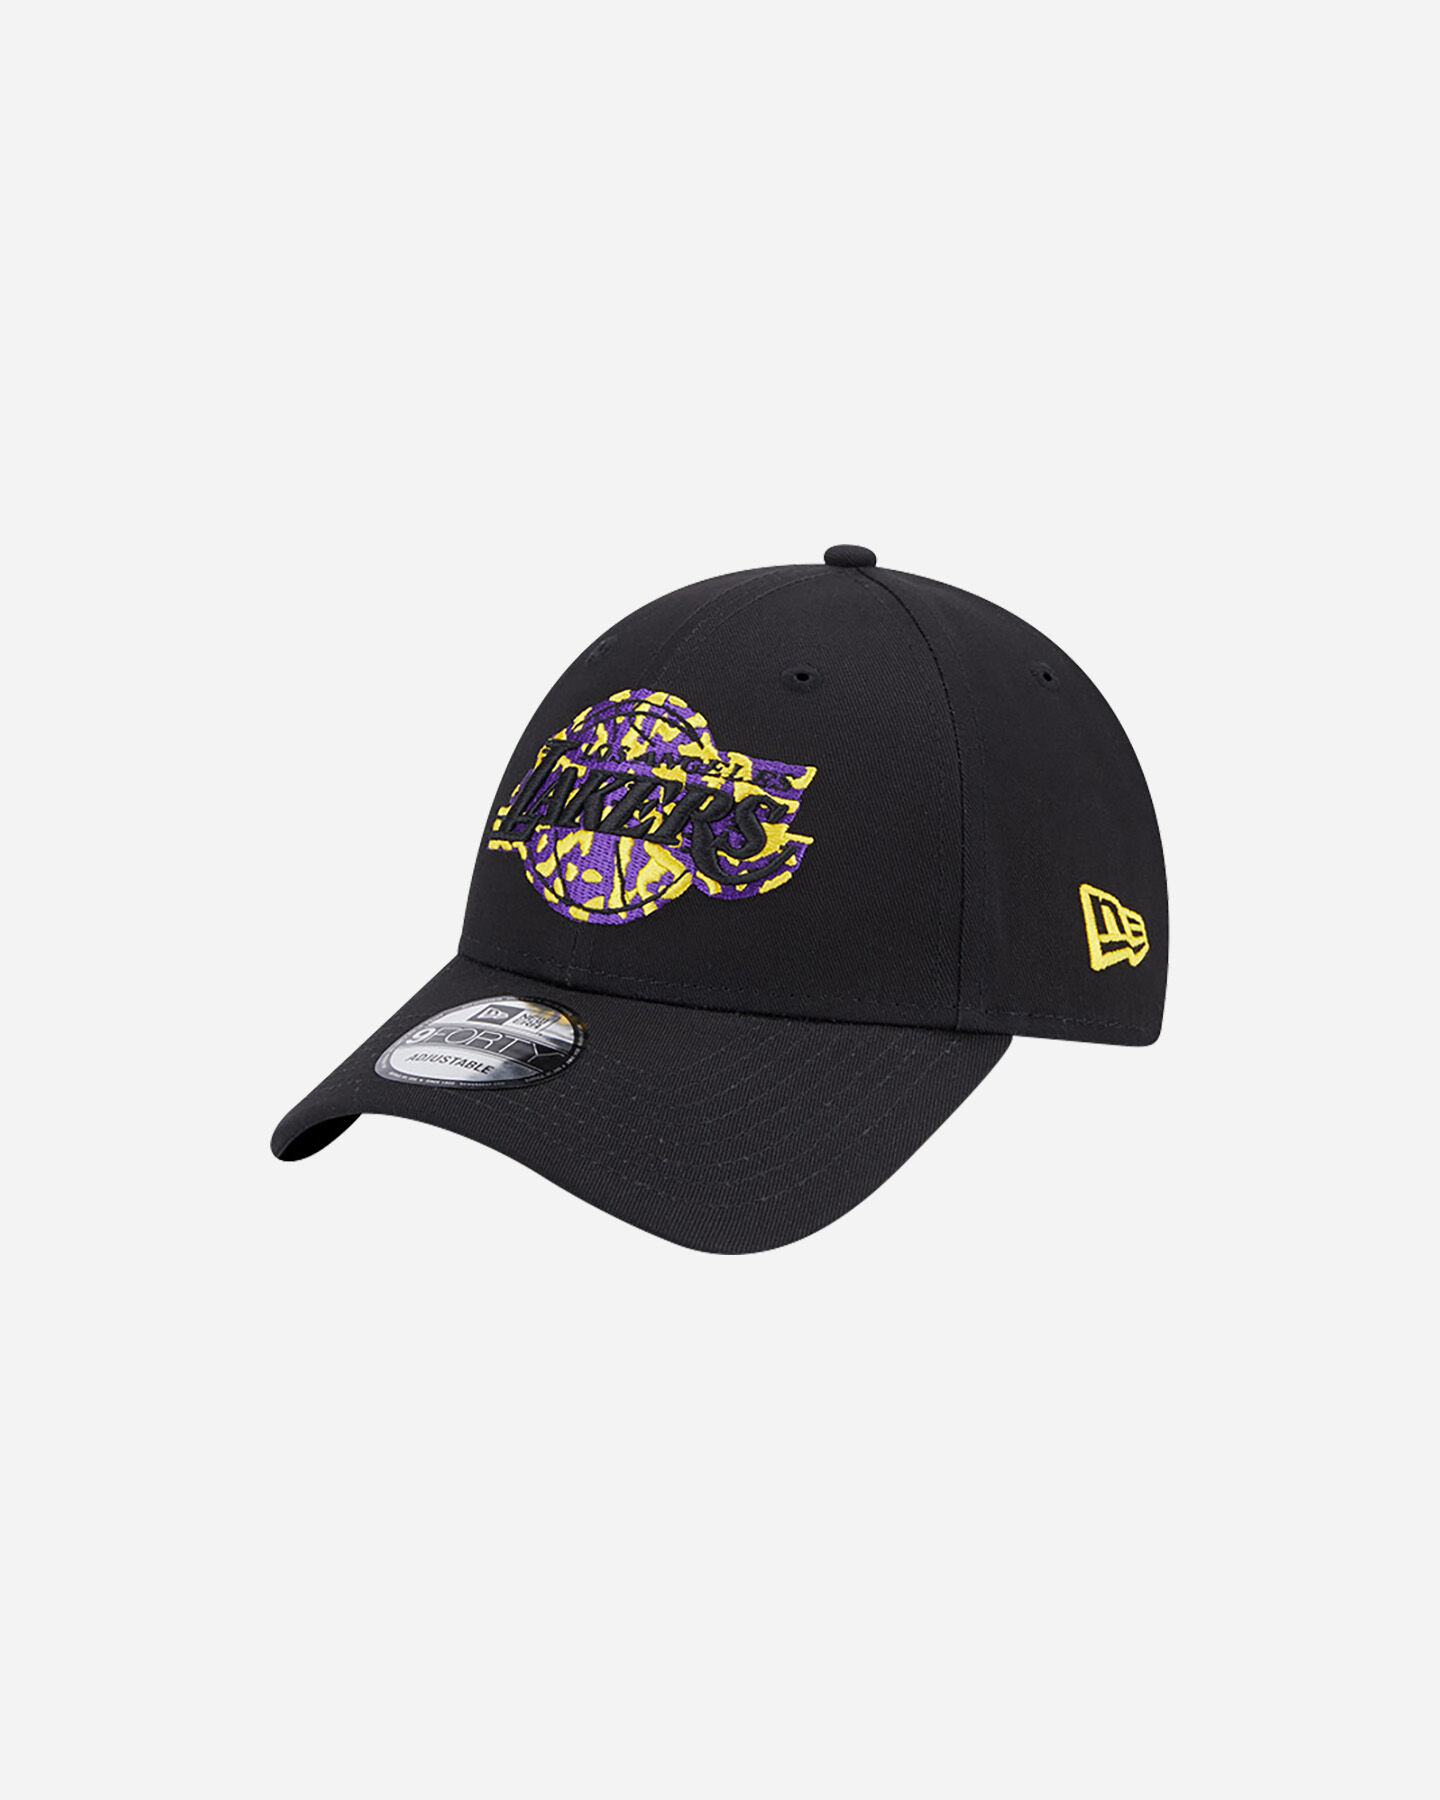  Cappellino NEW ERA 9FORTY SEASON INFILL LOS ANGELES LAKERS  S5606252|001|OSFM scatto 0